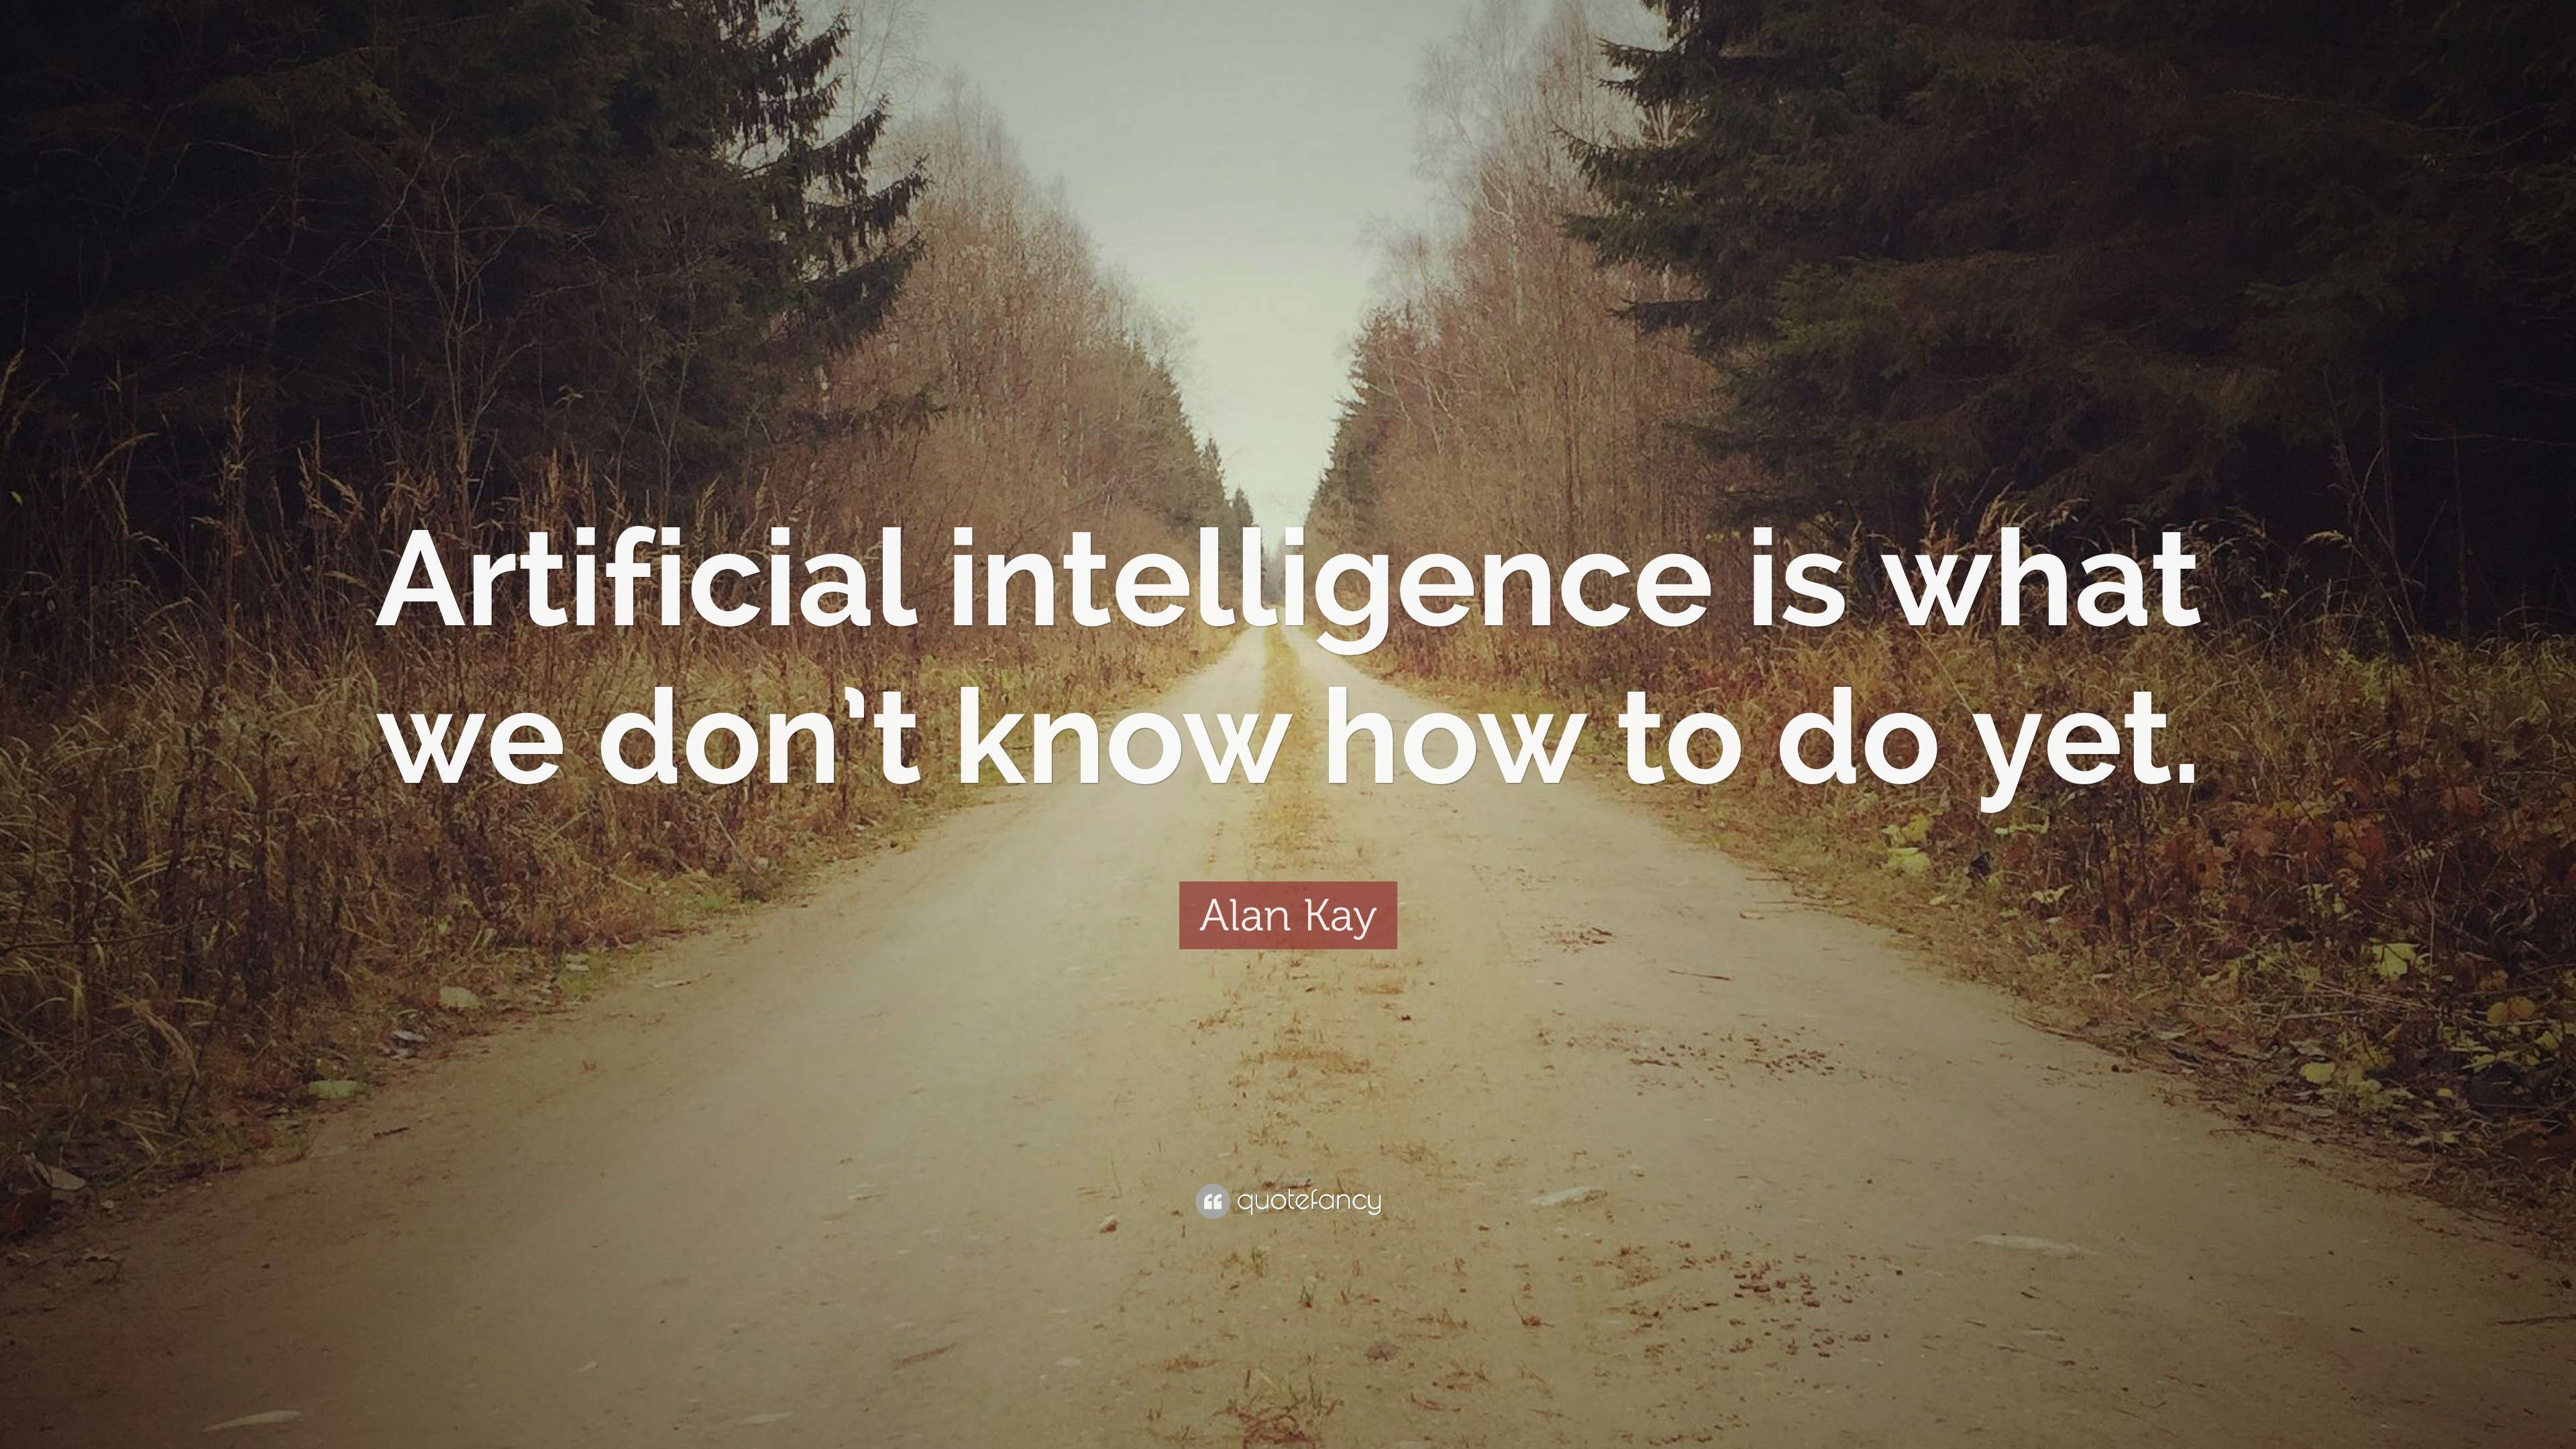 Alan Kay Quote: “Artificial intelligence is what we don’t know how to ...